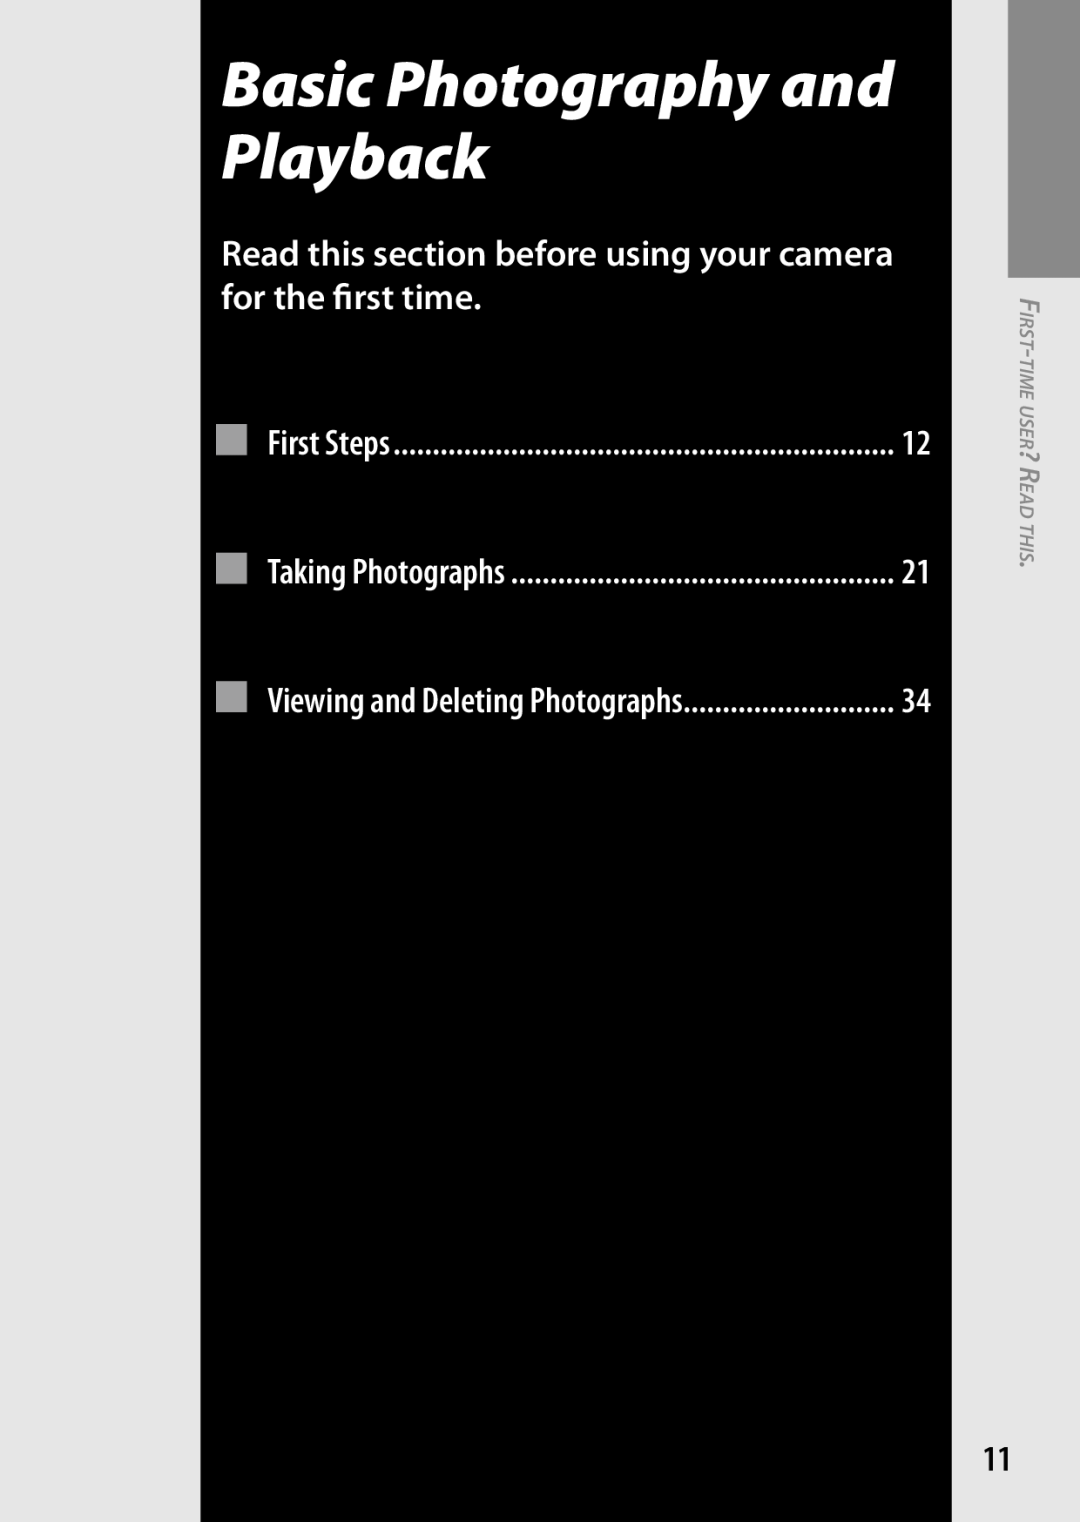 Ricoh 170553 Basic Photography and Playback, Read this section before using your camera for the first time, First Steps 